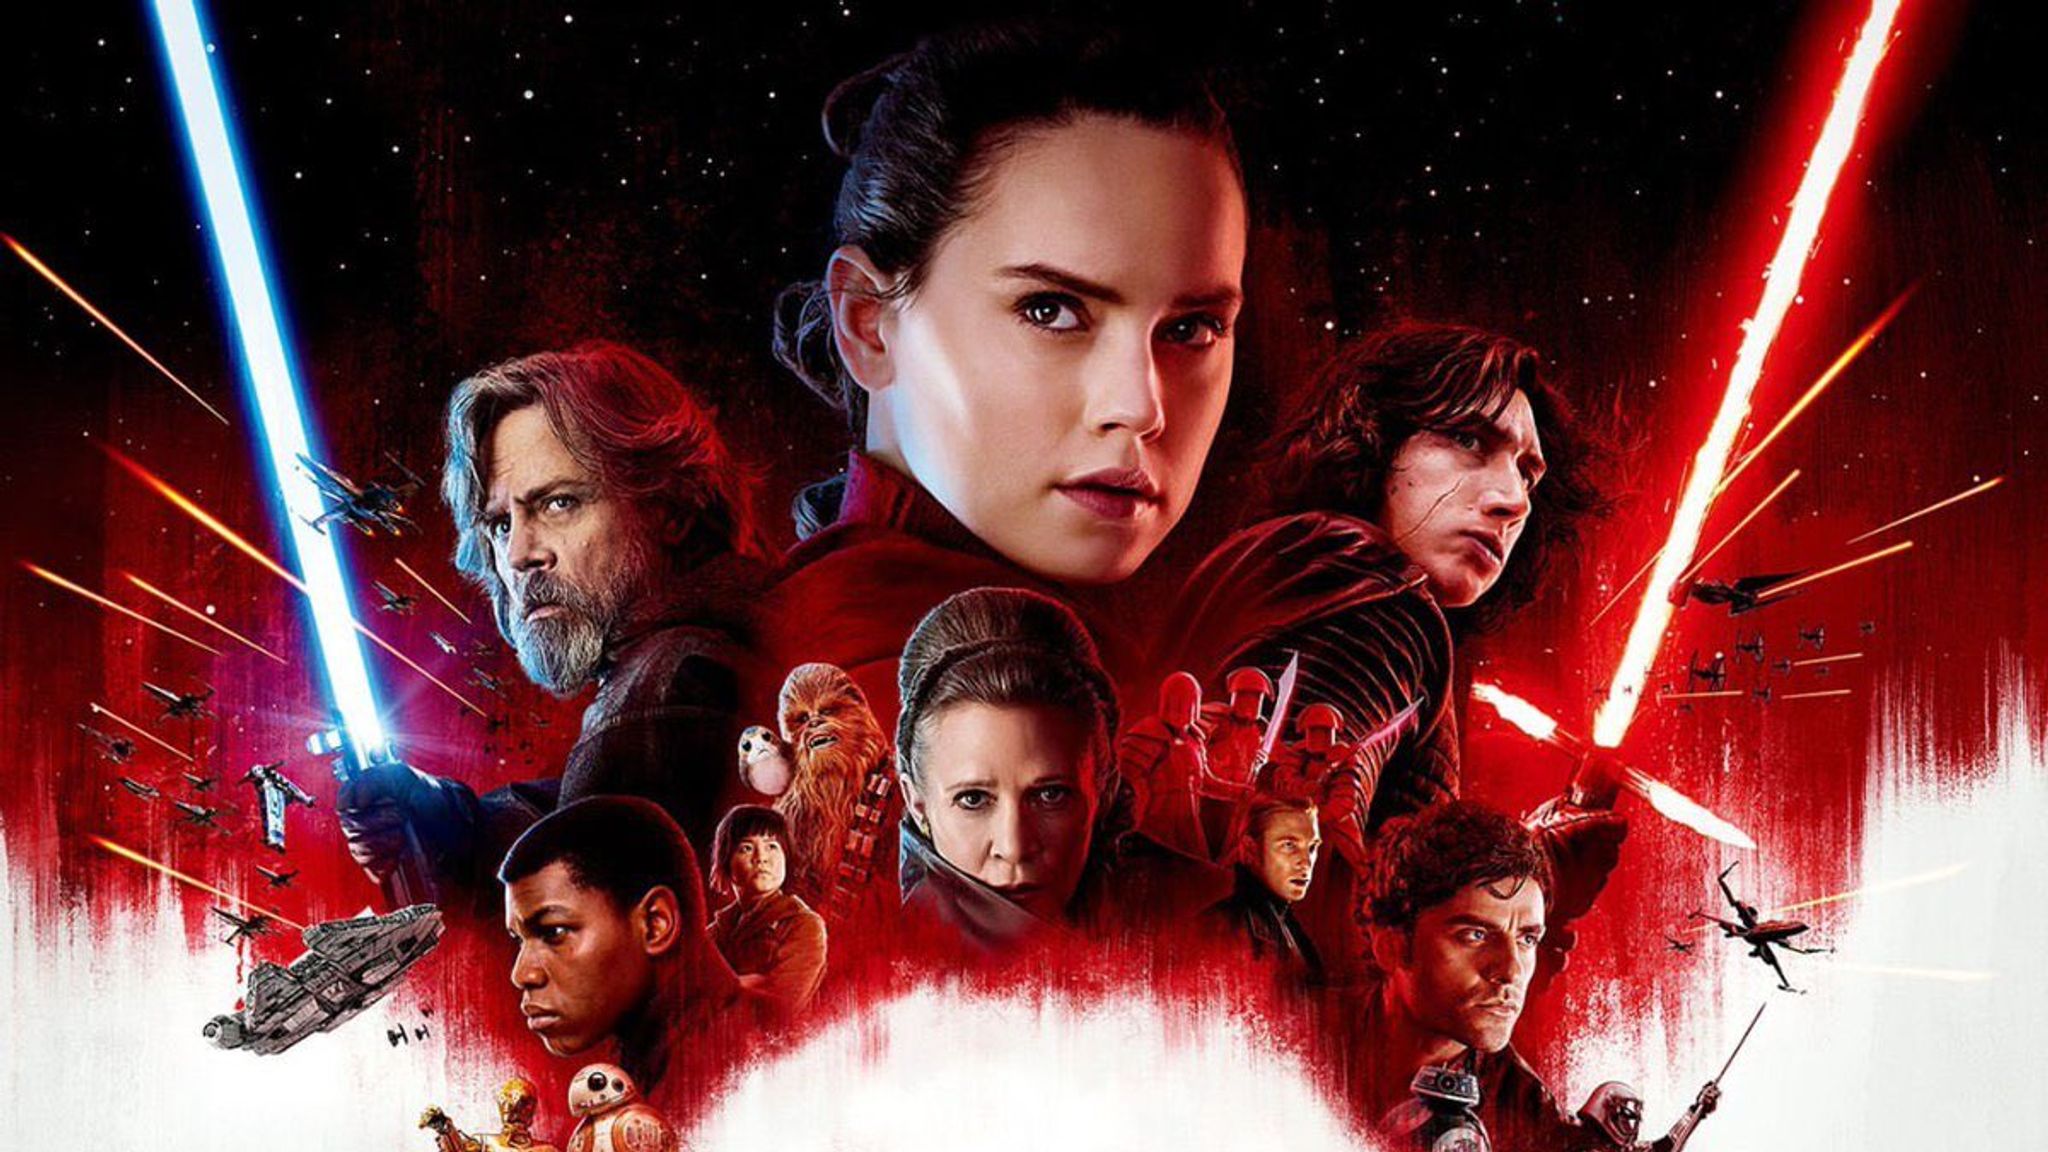 No-spoiler review: Star Wars has changed forever